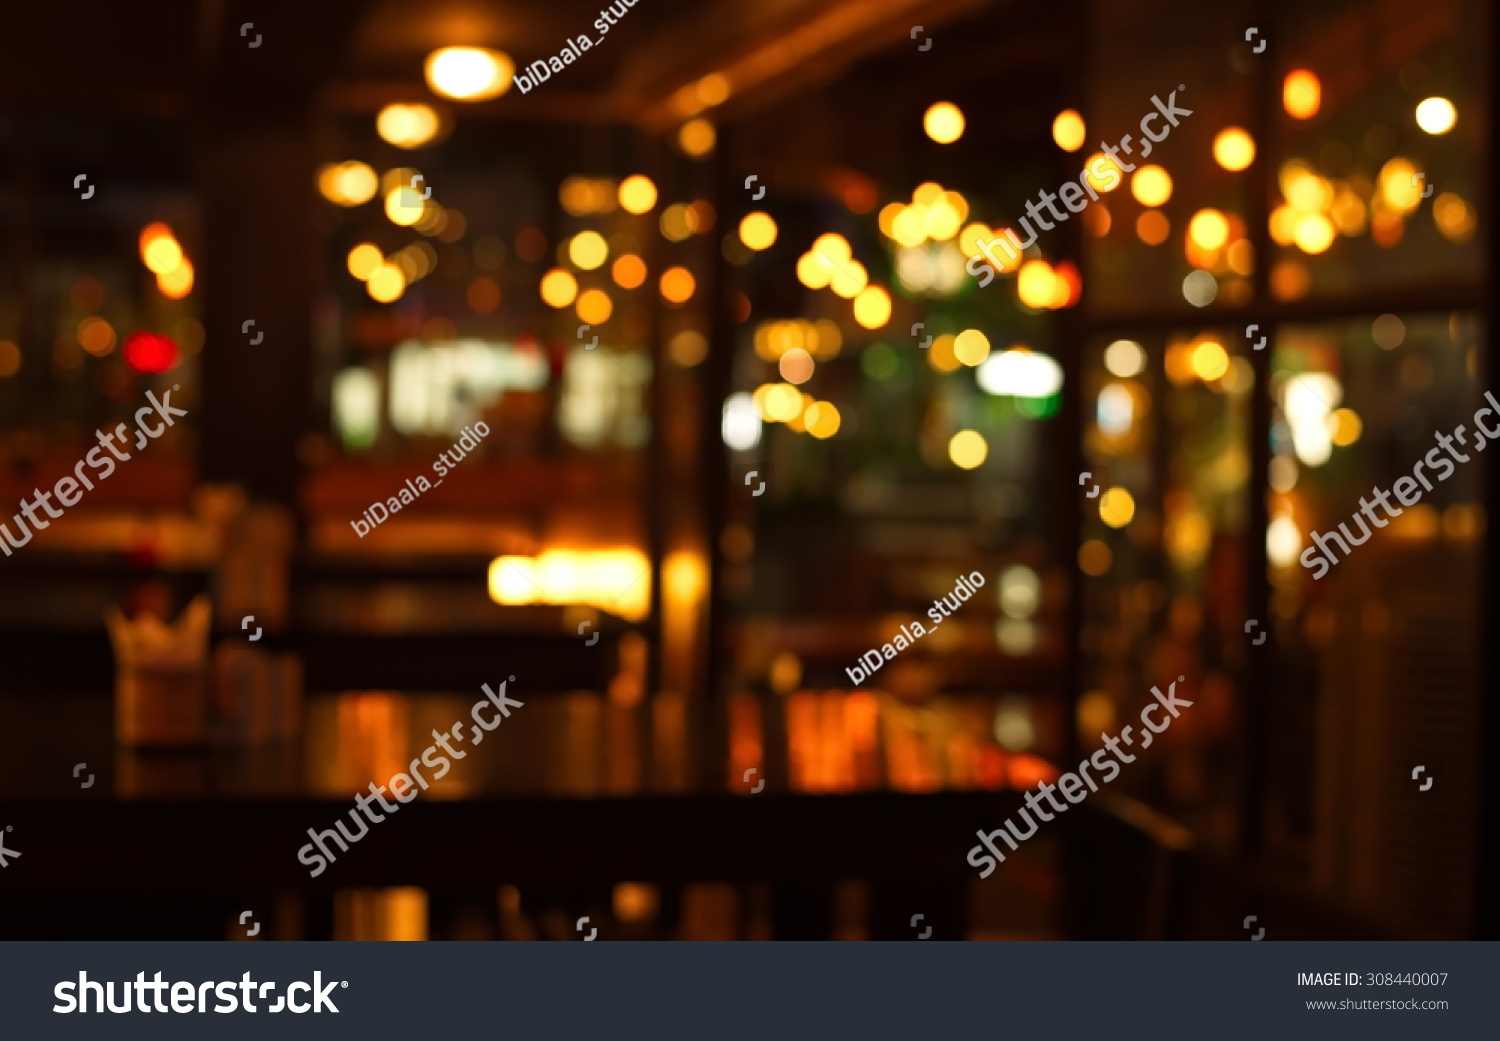 table in blur pub or bar nightclub and restaurant at Christmas night celebrate party with bokeh light background #308440007